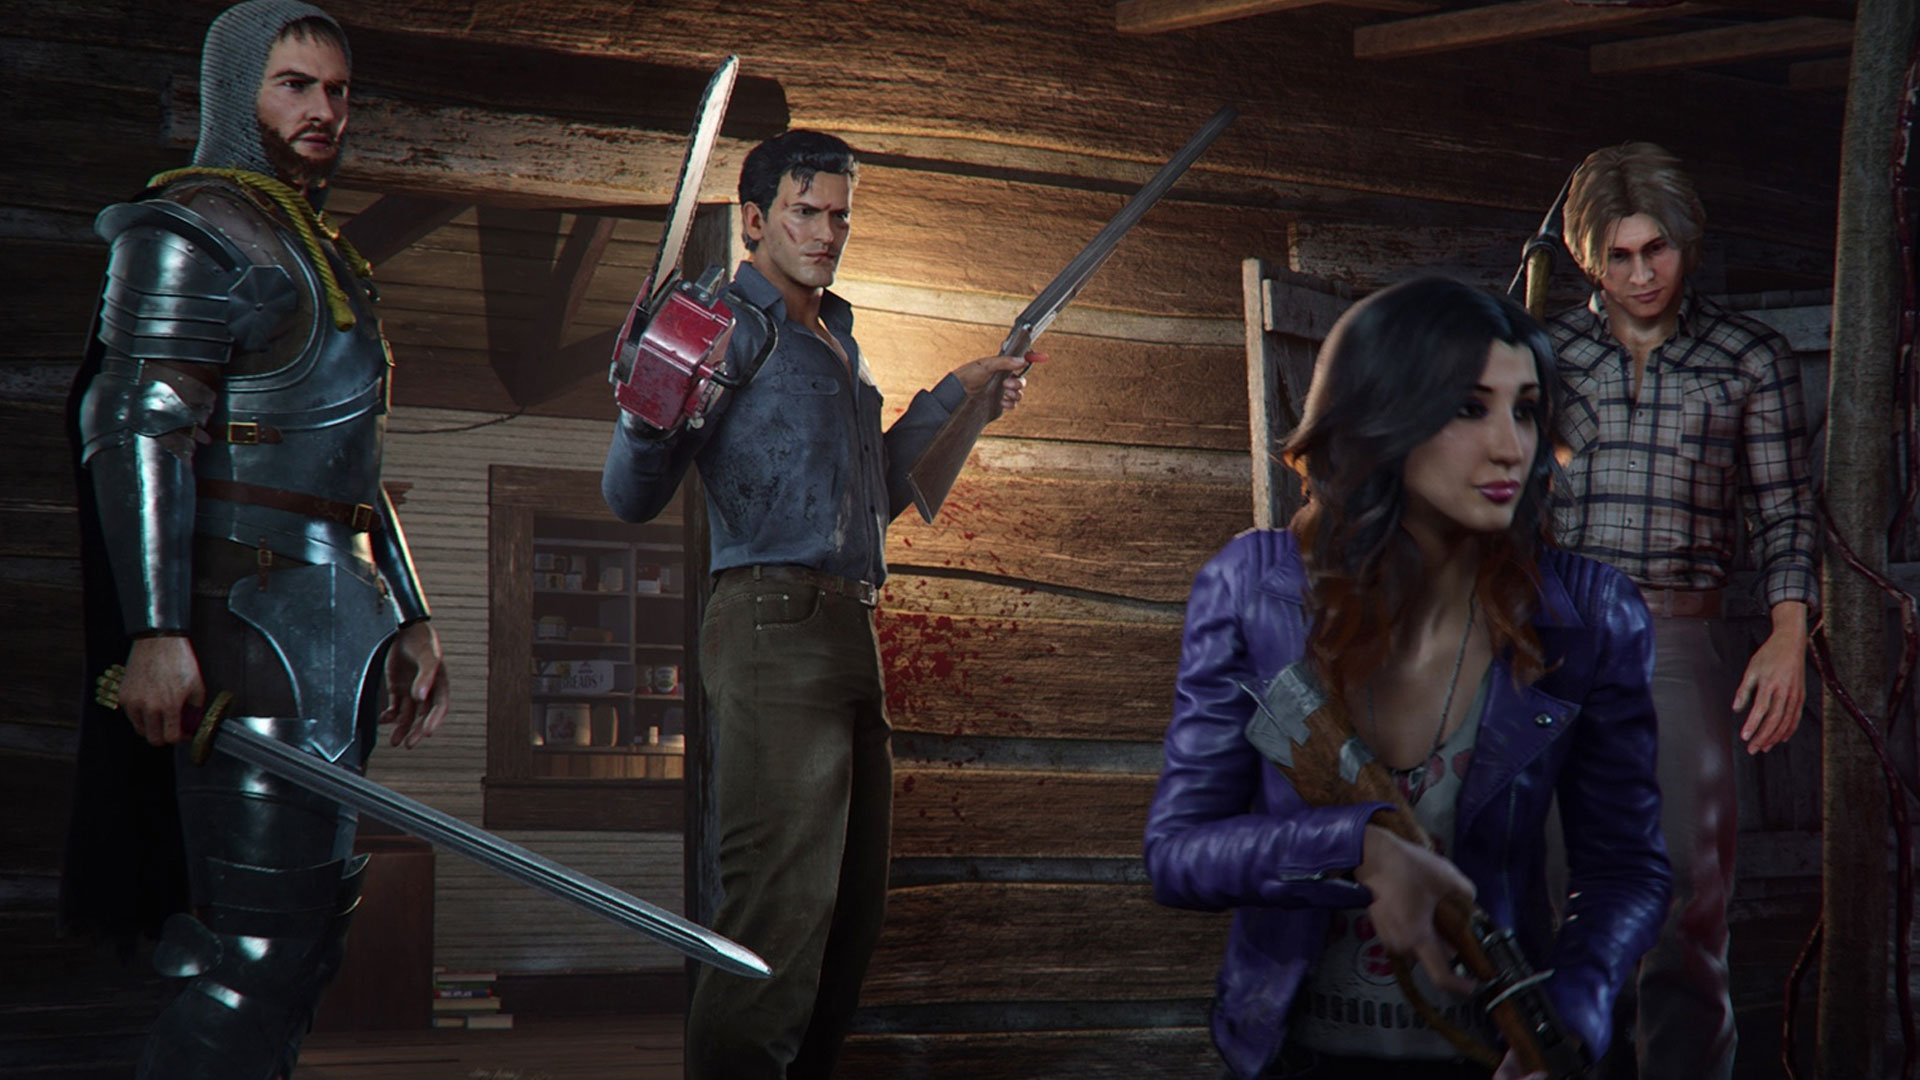 Epic Games Store offers Evil Dead: The Game for free - How to